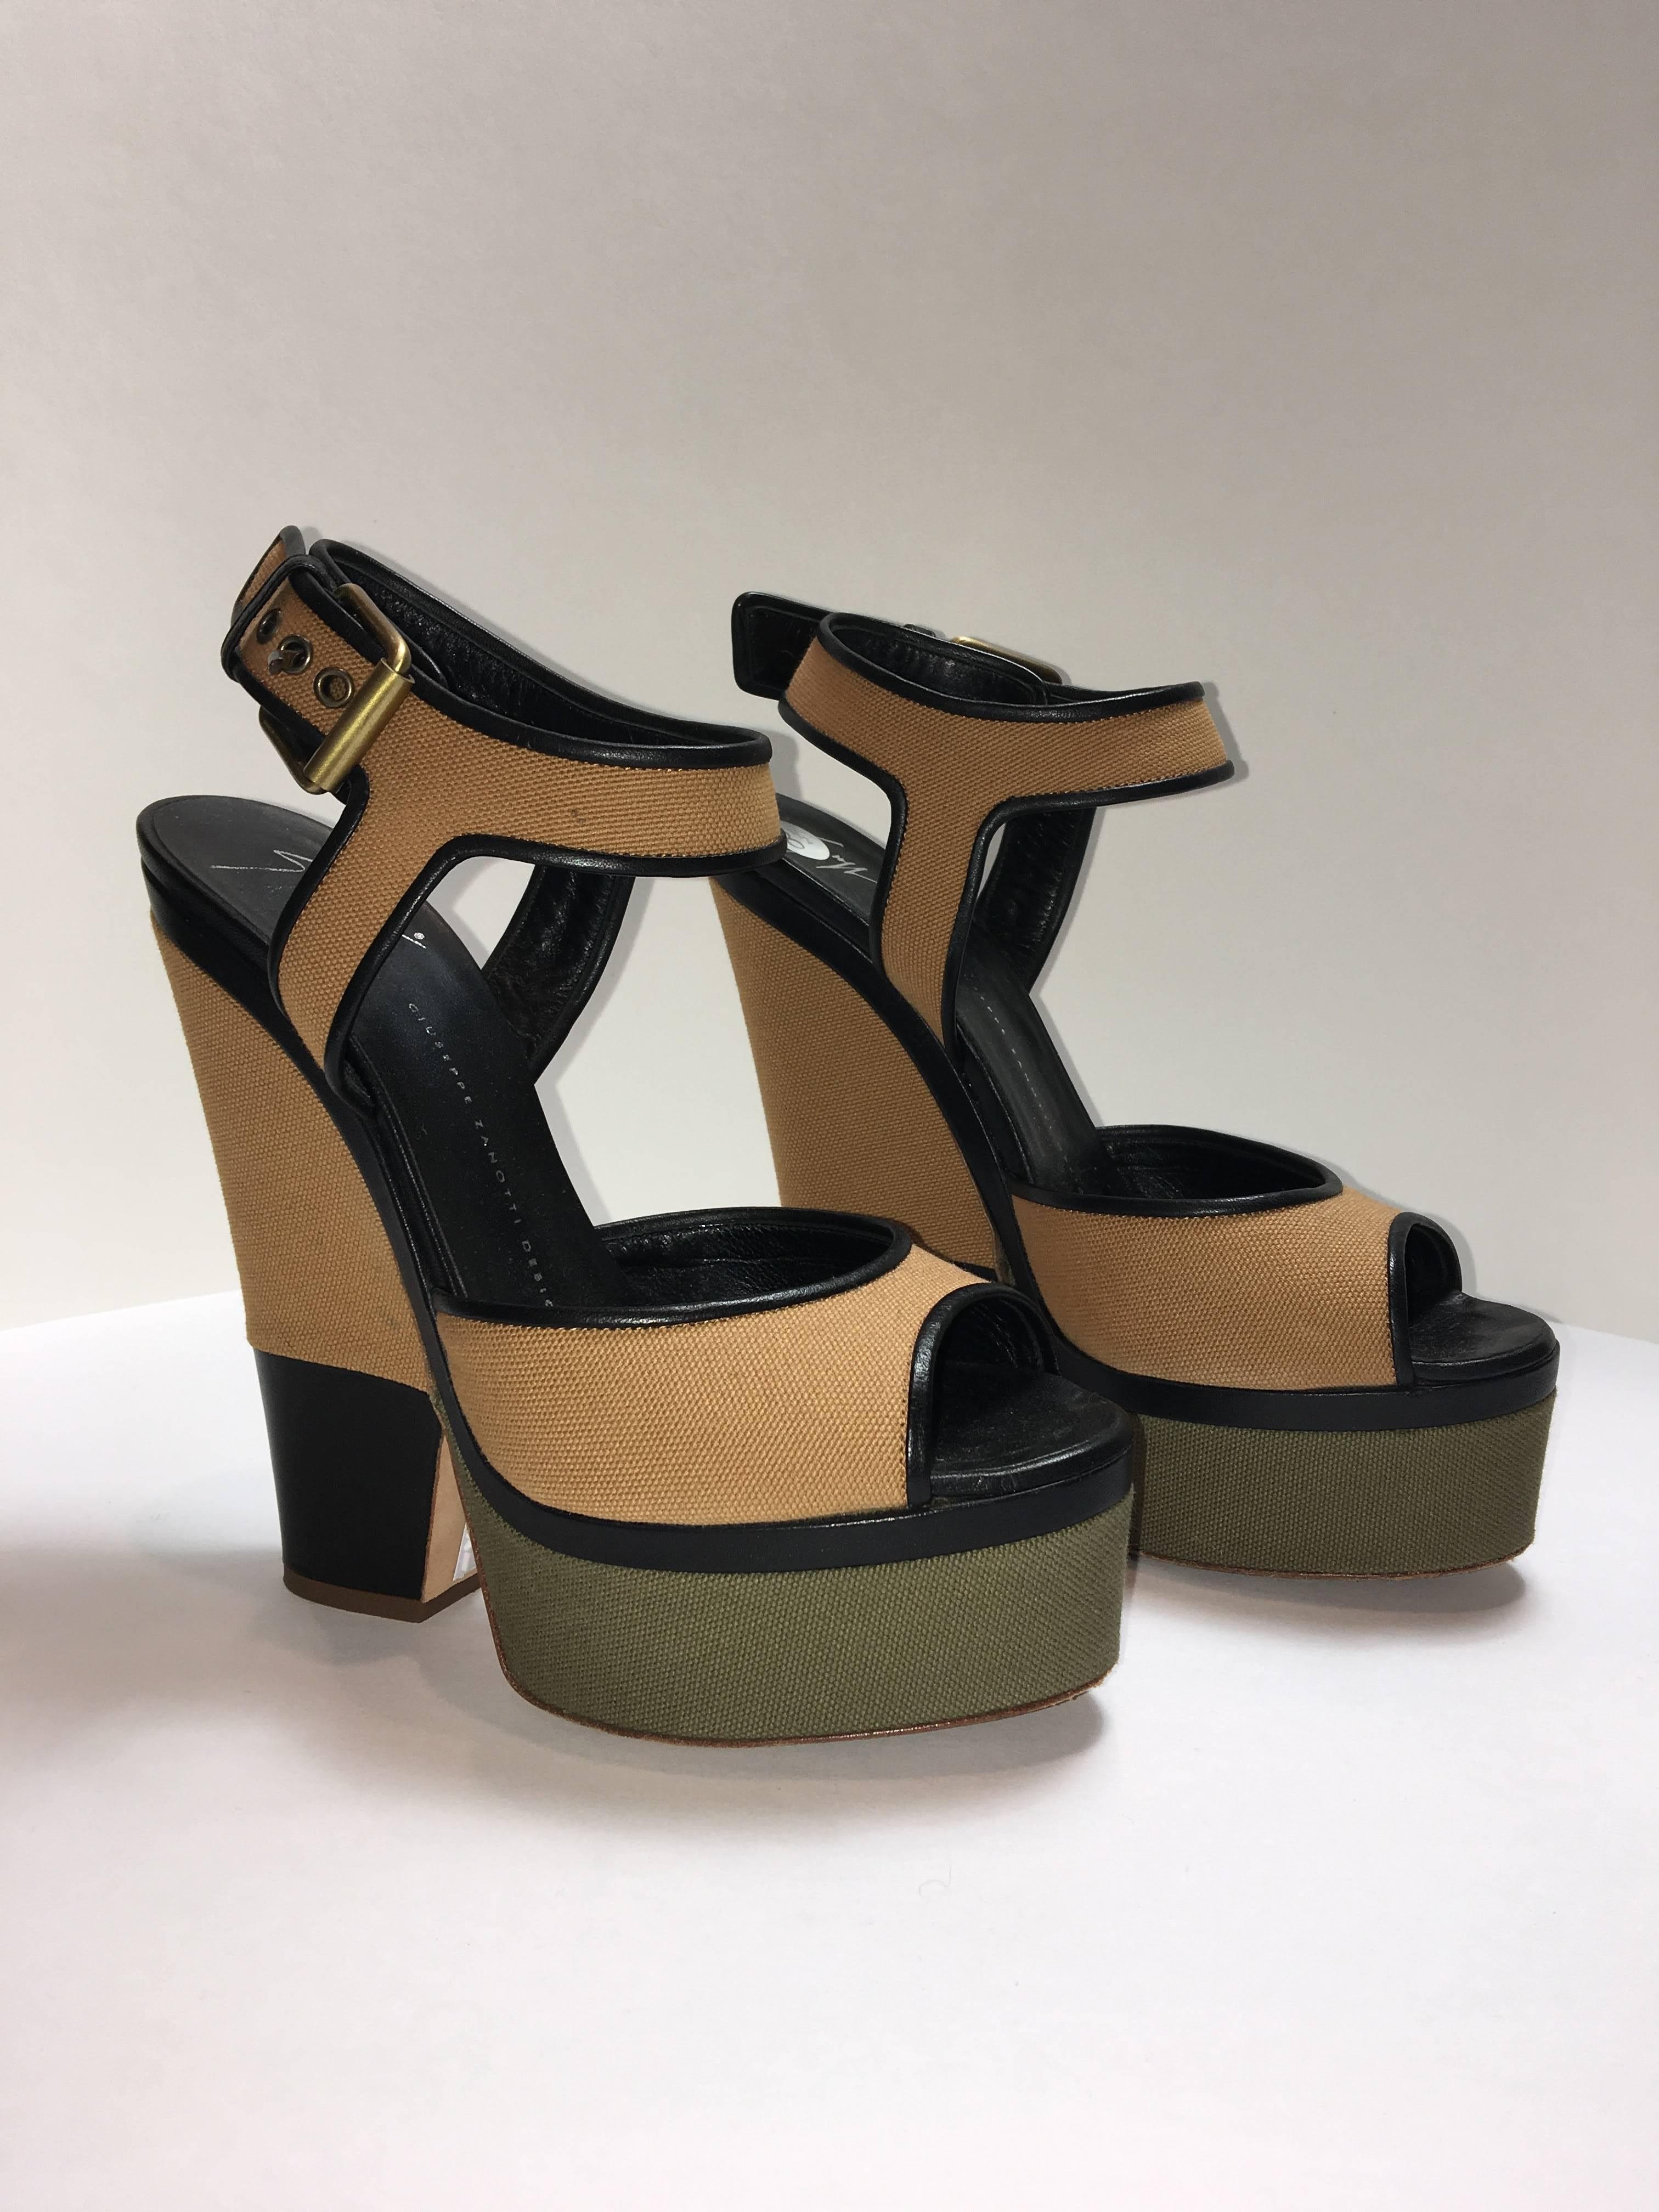 Giuseppe Zanotti Design Canvas Block heels with a leather trim detail. A tan color block design with contrasting olive and black platform. 